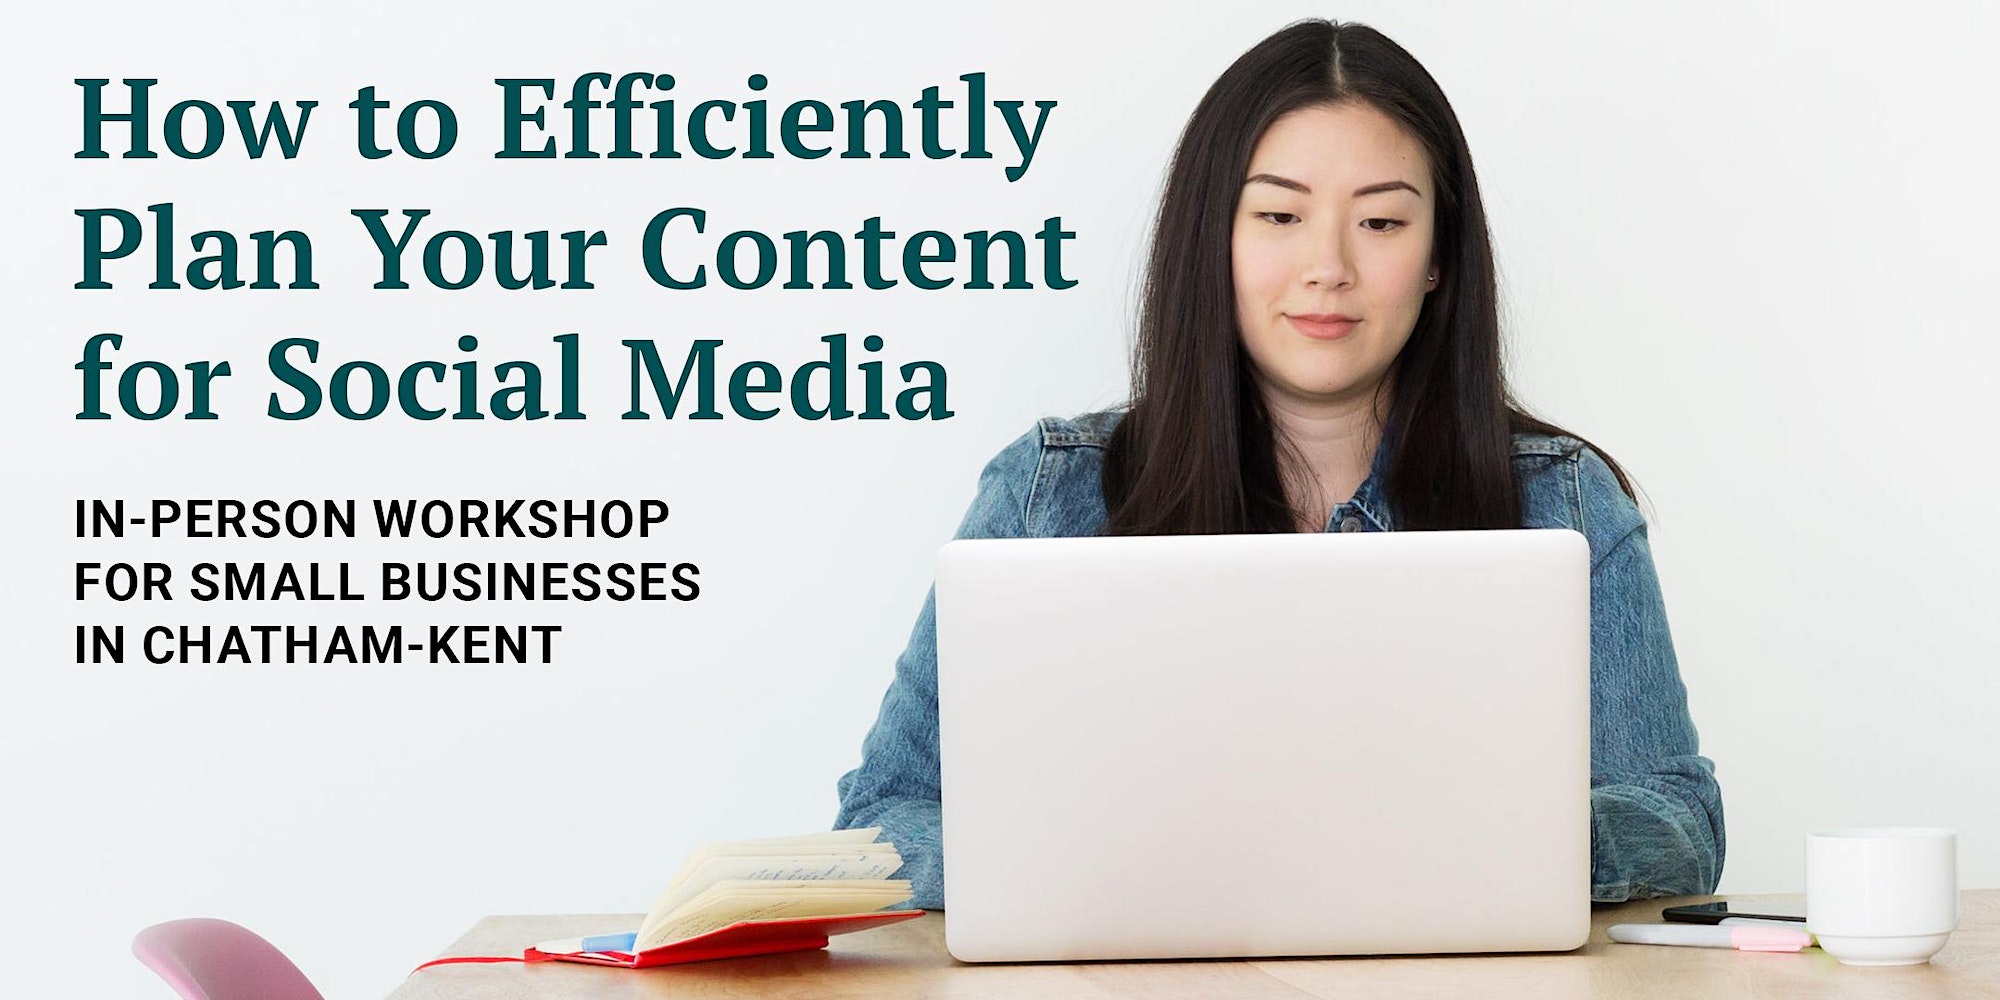 How to efficiently plan your content for social media. In-person workshop for small businesses in chatham-kent.